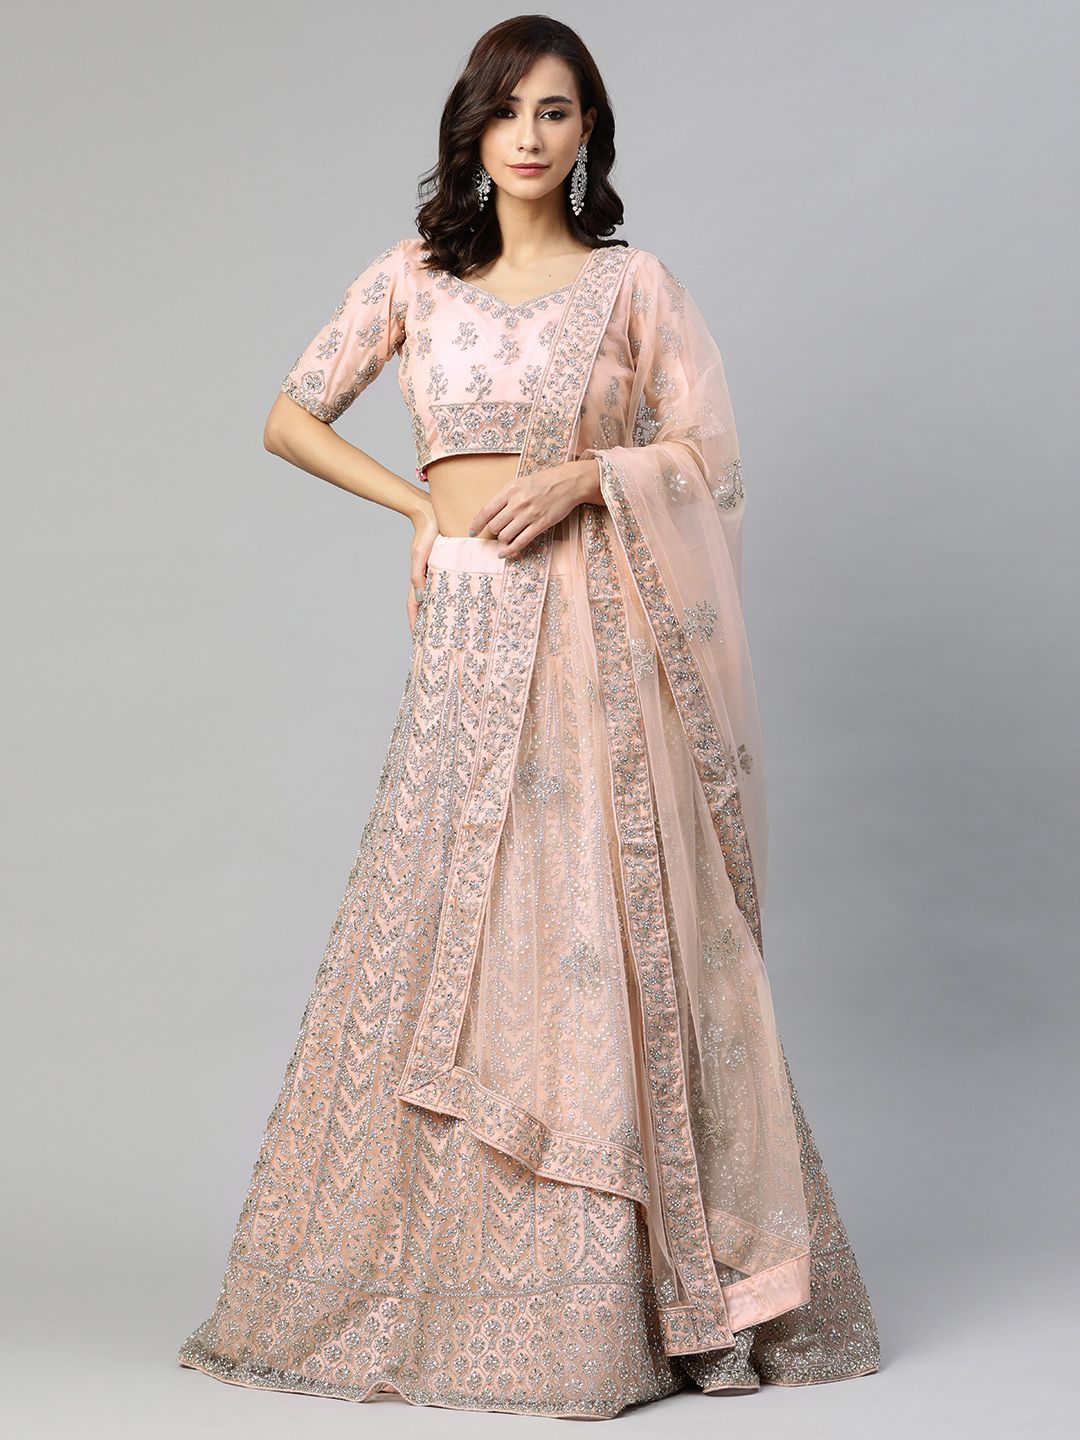 SHUBHVASTRA Peach-Coloured & Silver Semi-Stitched Lehenga & Unstitched Blouse With Dupatta Price in India